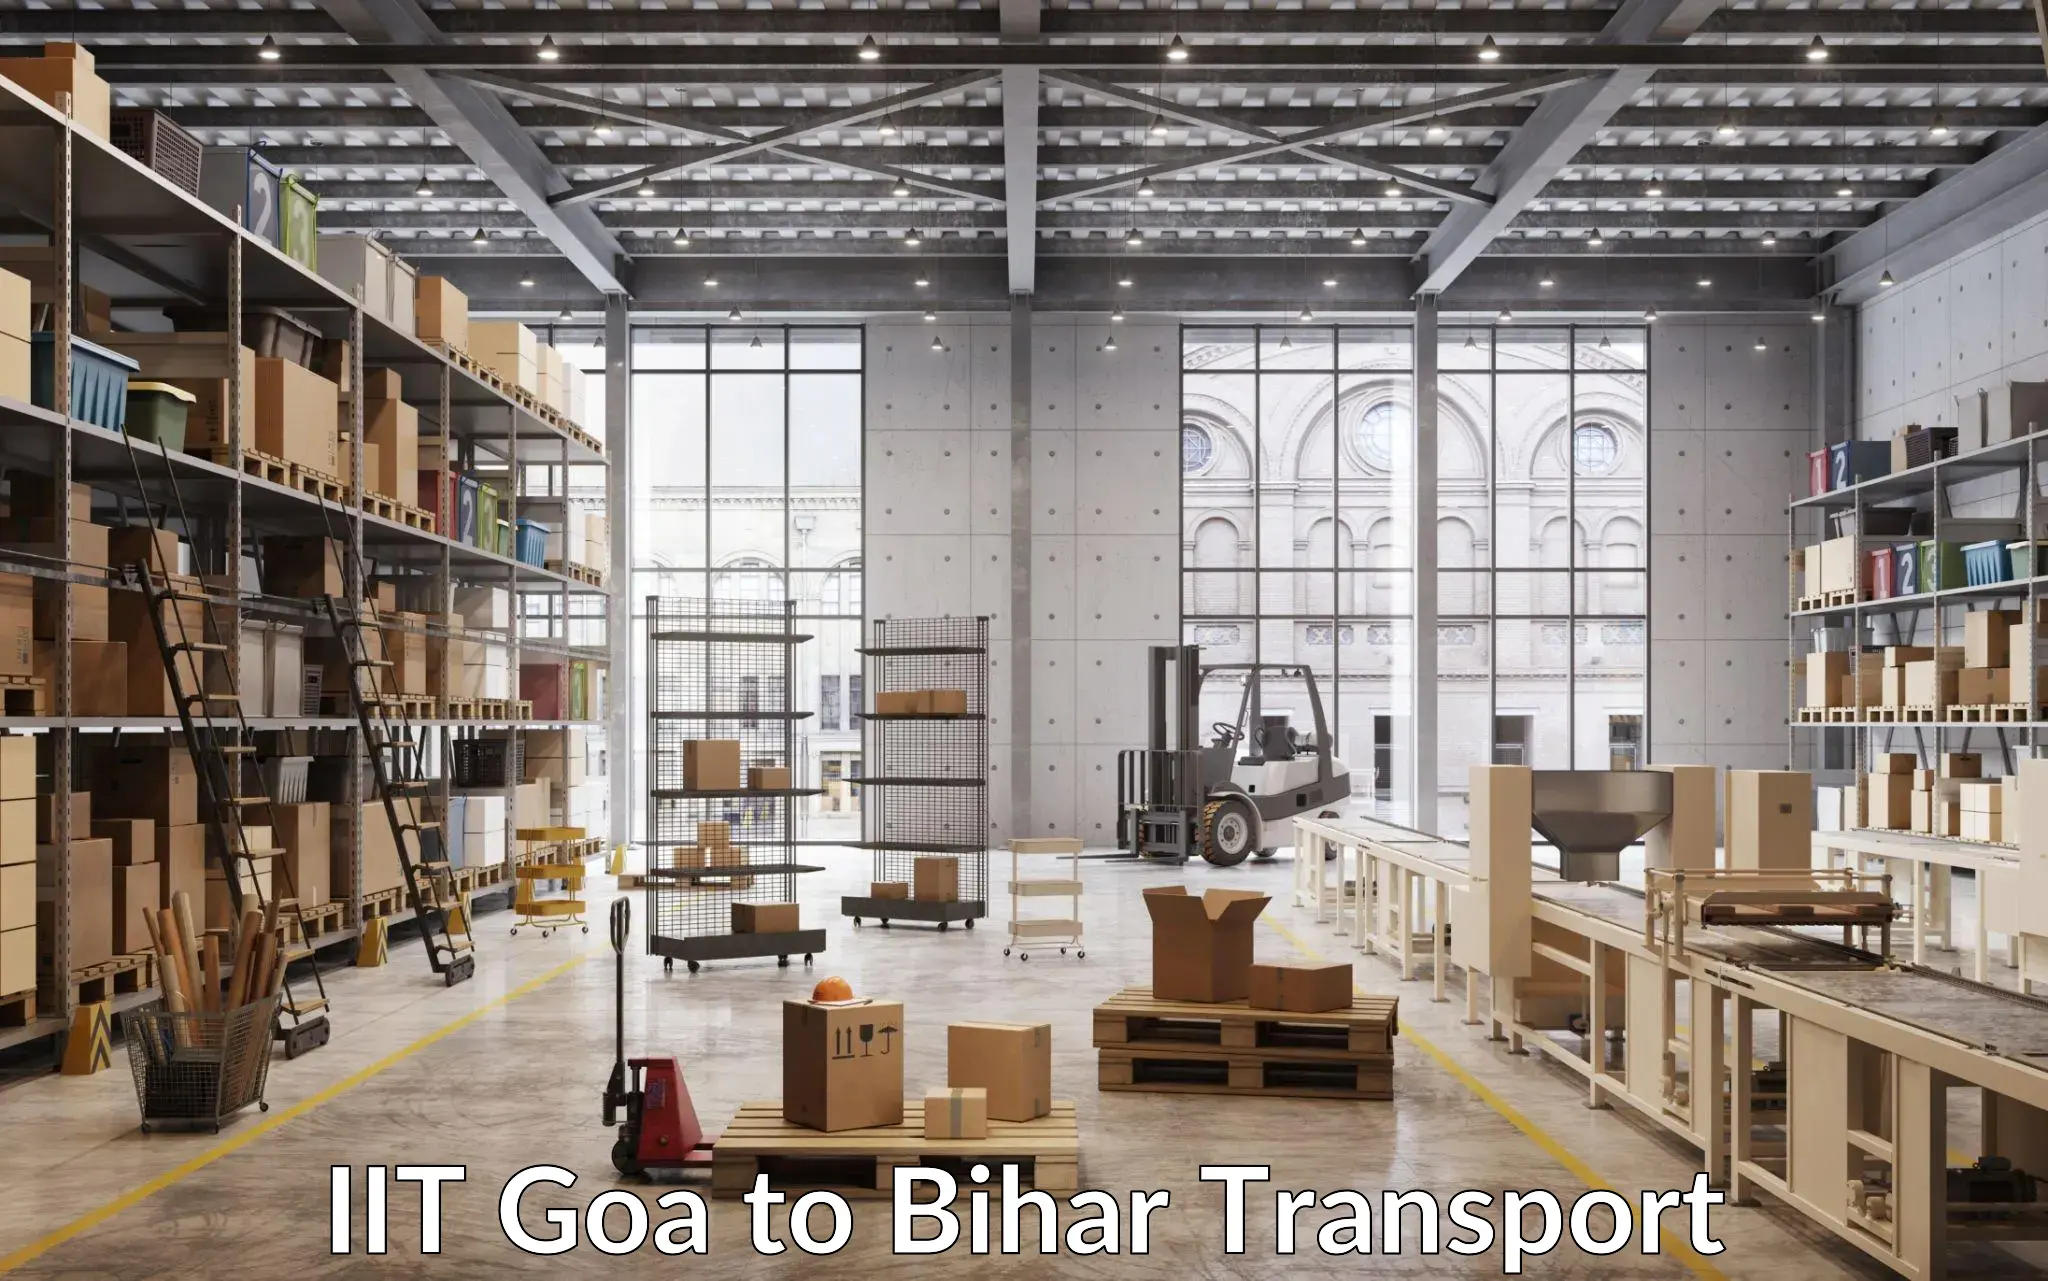 Transport bike from one state to another IIT Goa to Kamtaul